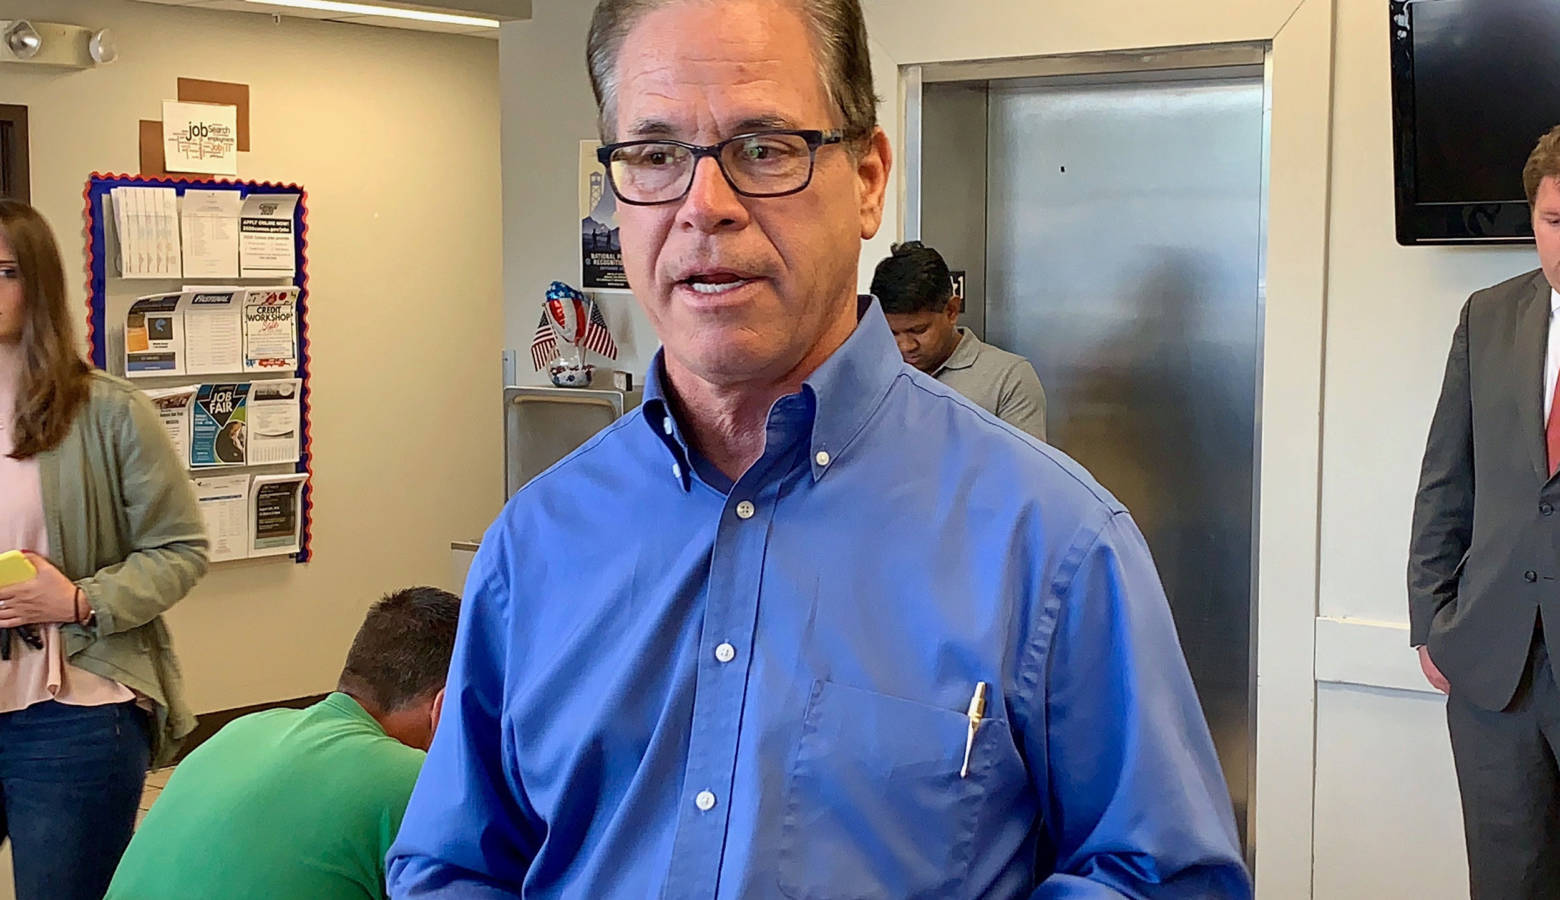 U.S. Sen. Mike Braun (R-Ind.) says he supports President Donald Trump's proposal to import some lower-cost prescription drugs from Canada. (Brandon Smith/IPB News)